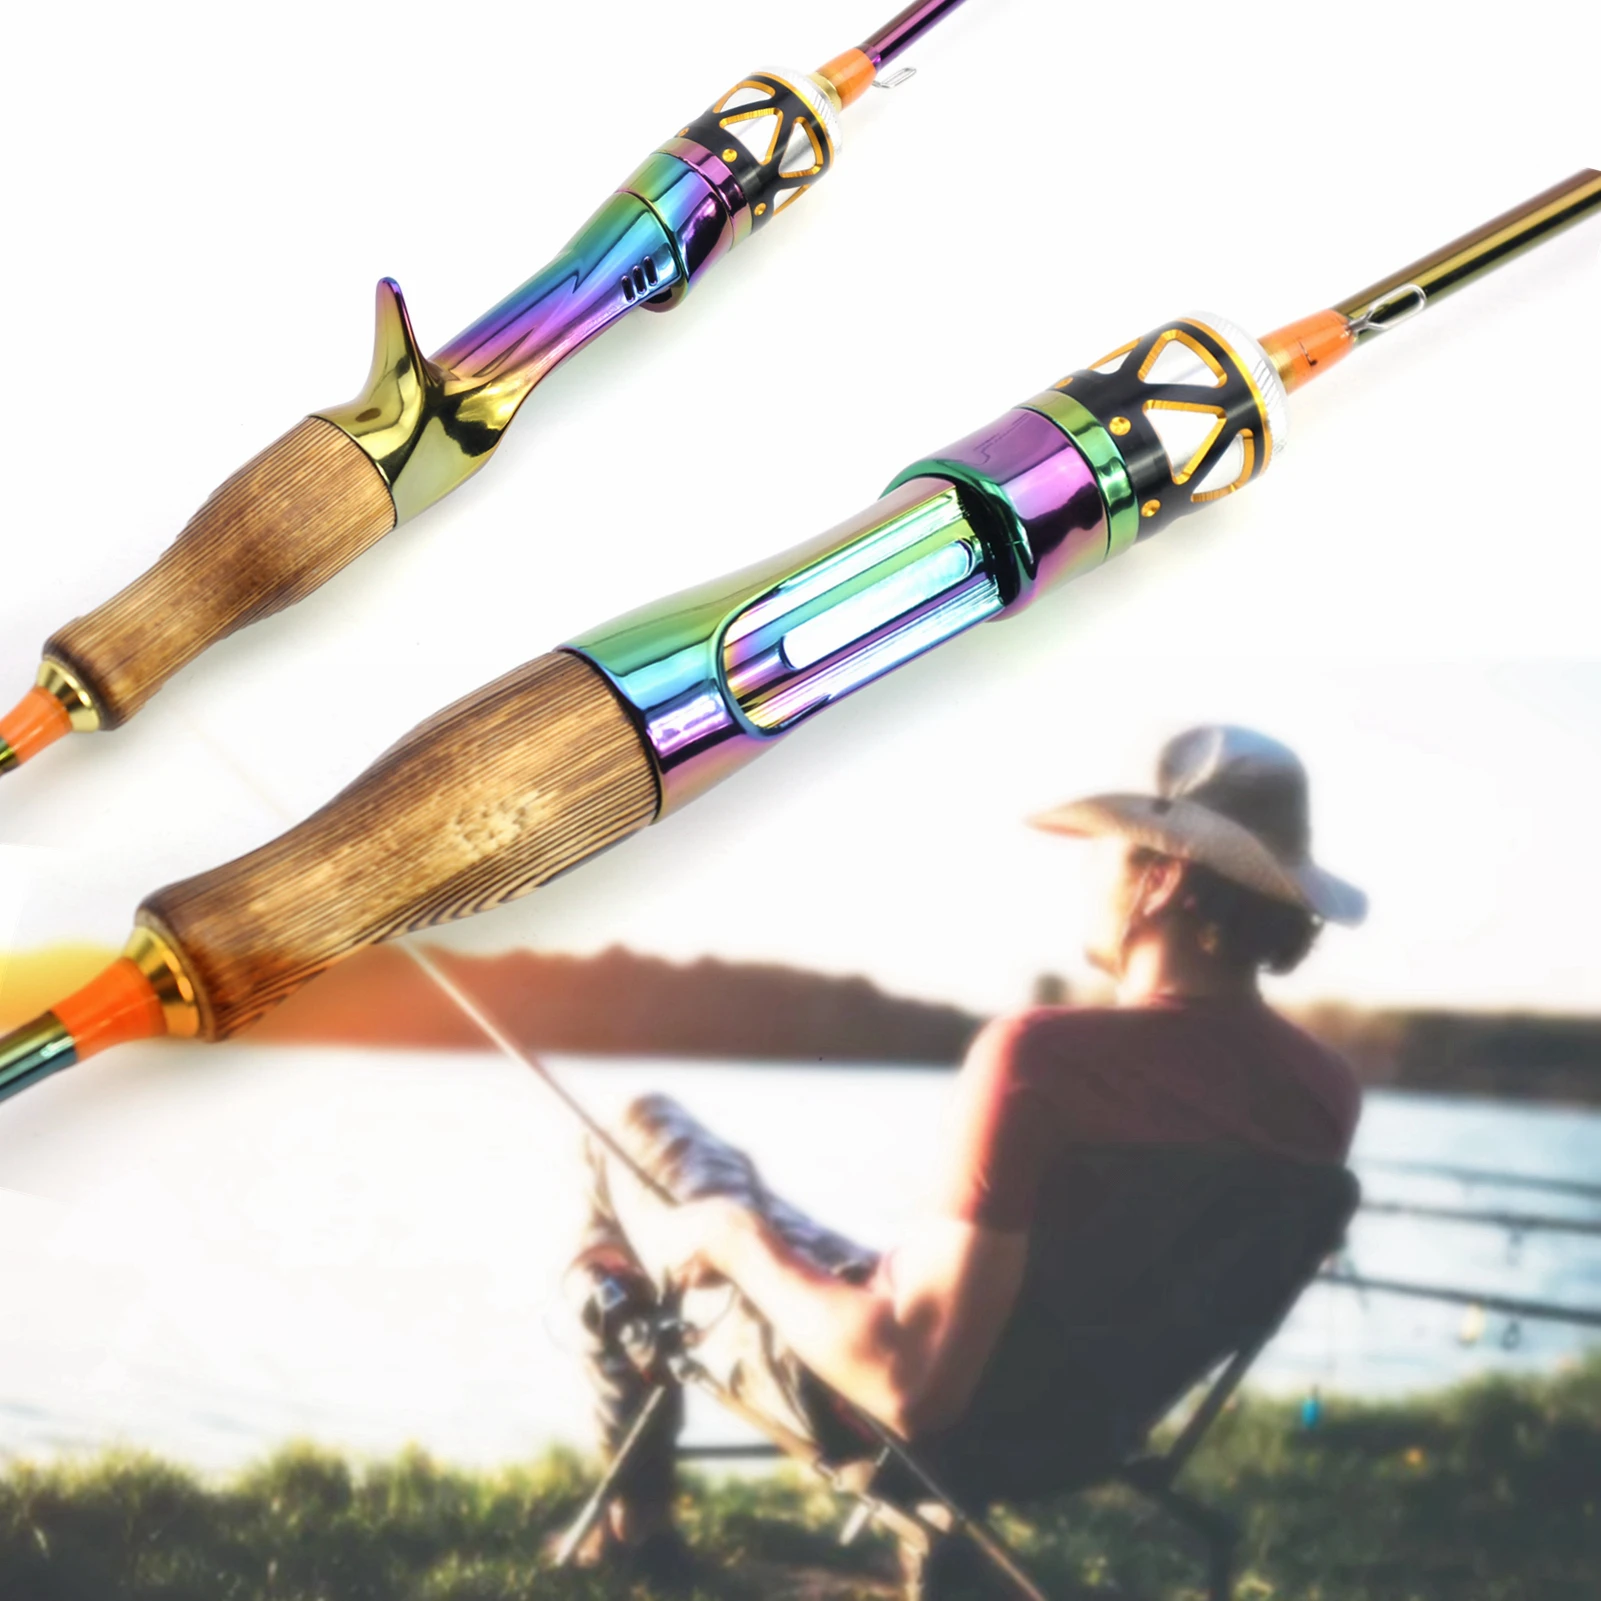 NEW 1.8M Colorful Solid Tip Trout Lure Fishing Rod UL Power Ultralight 2-8g Carbon  Spinning Casting Rod Stream Trout Pole - AliExpress